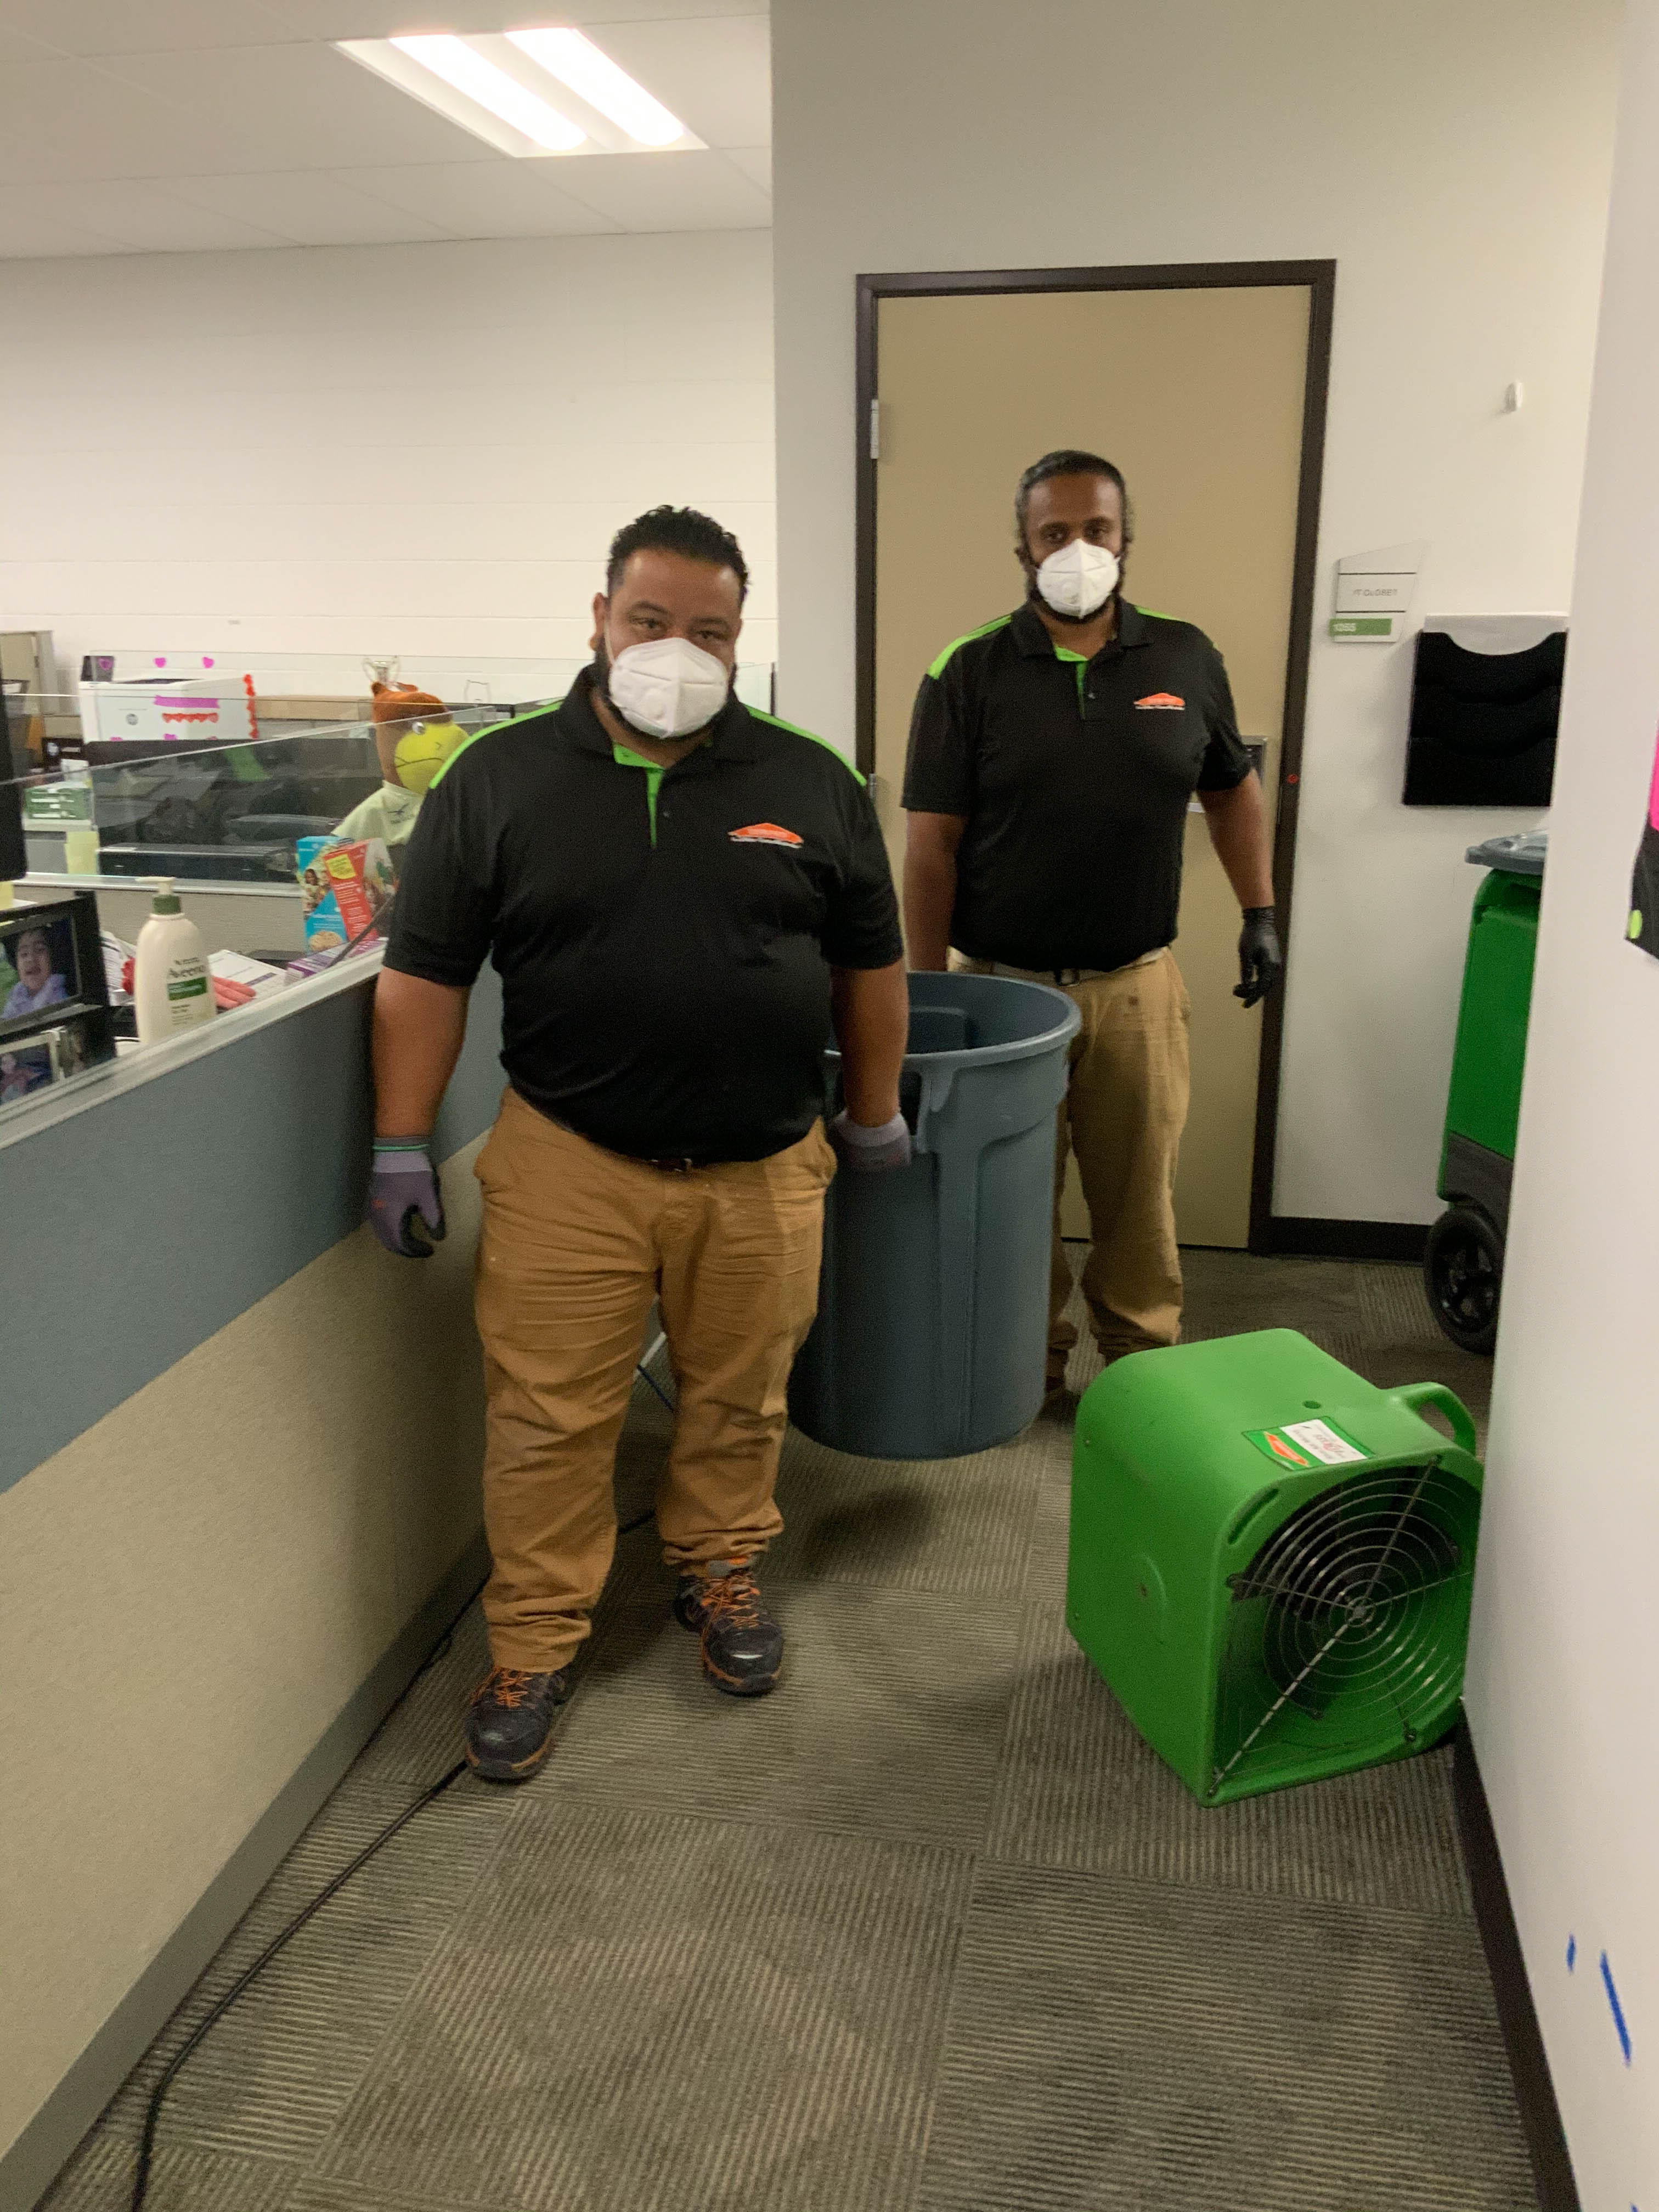 We'd like to remind you that our SERVPRO of San Diego East team is considered an essential service, and we're here to help with water, fire, and mold restoration 24 hours a day, 7 days a week. You can trust SERVPRO of San Diego East to help you if disaster strikes your home or business in Santee, CA. Give us a call!